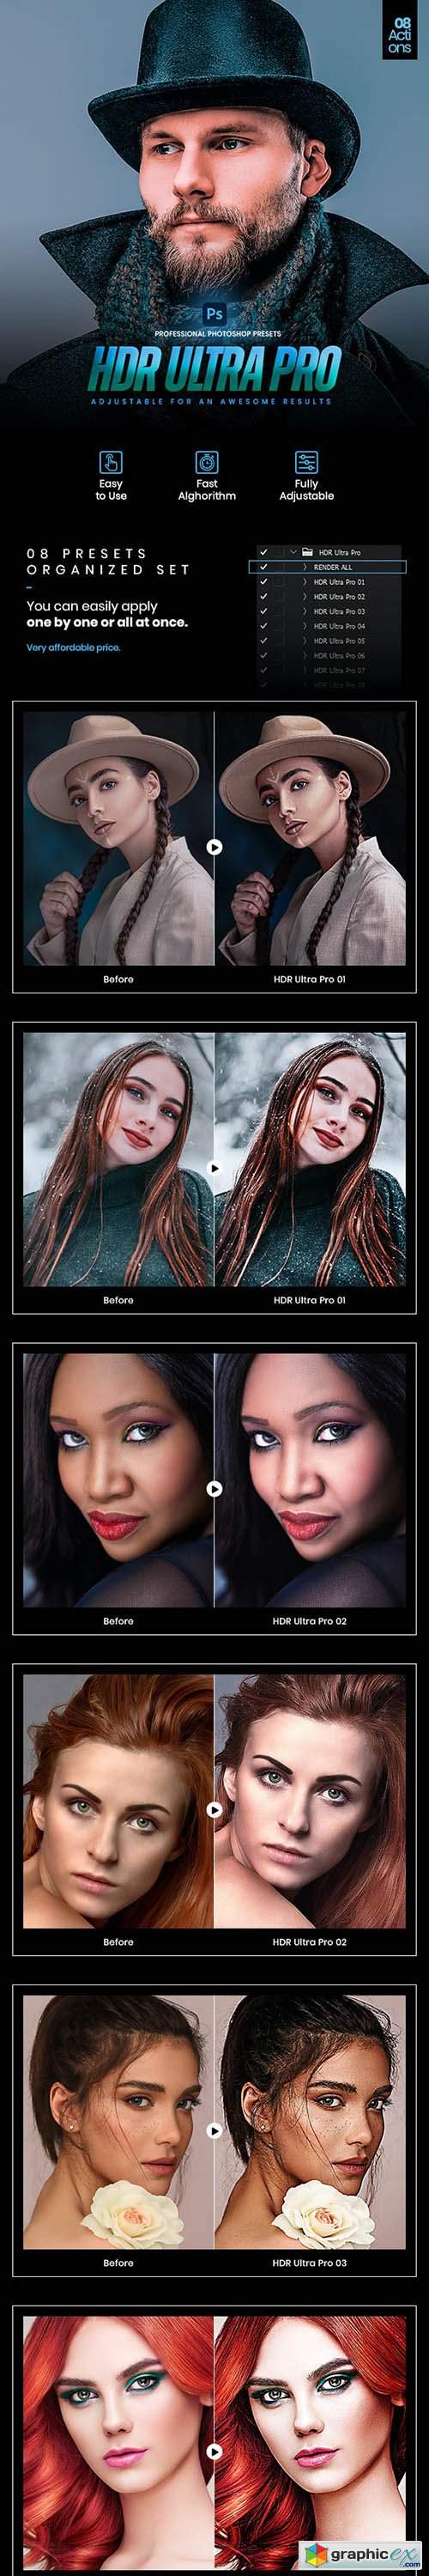 08 HDR Ultra Pro Photoshop Actions